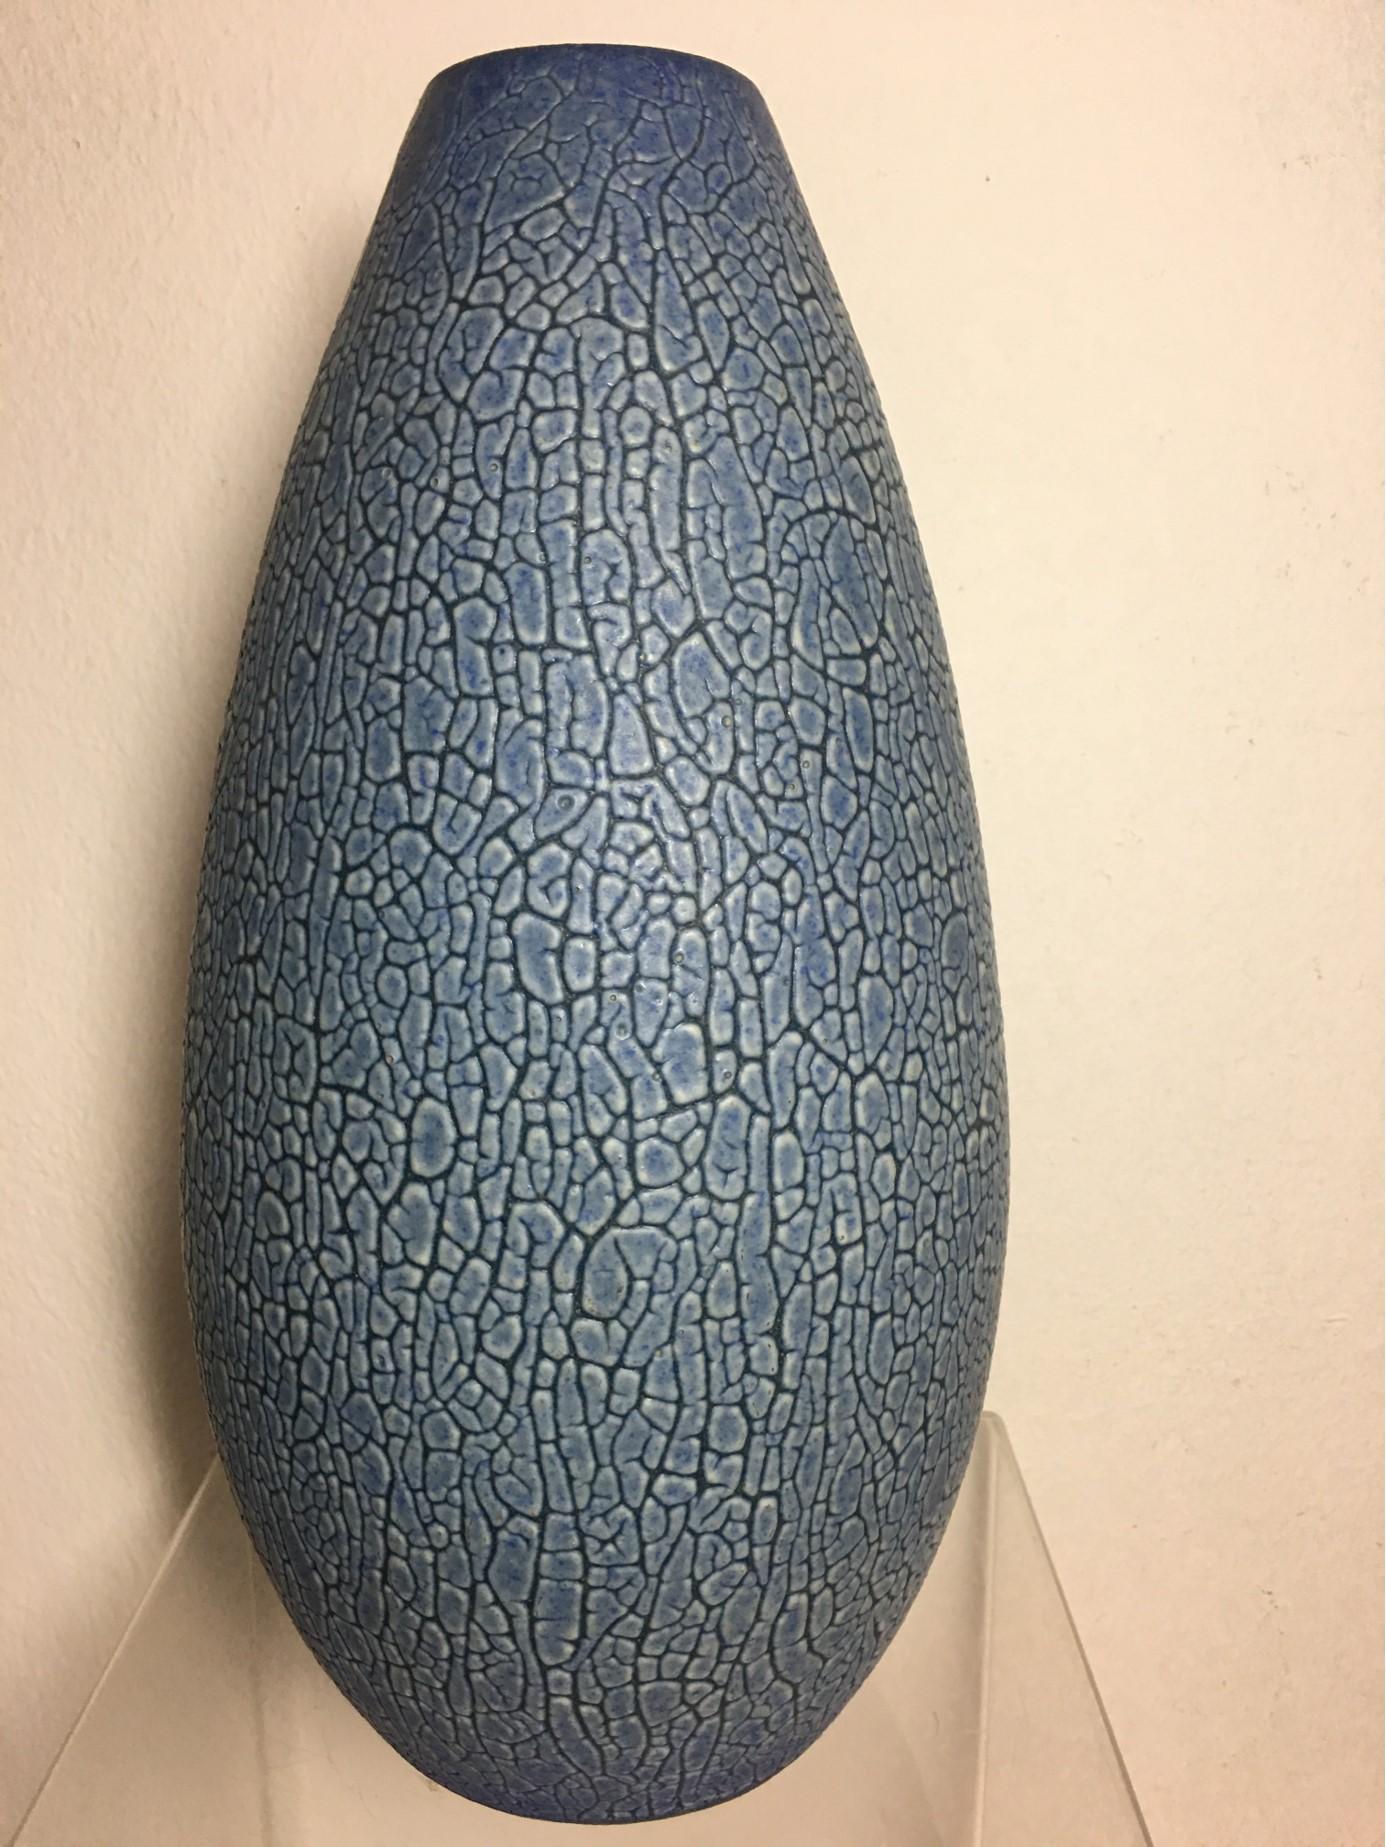 Reptile Skin Look Ceramic Vase from 1950s Germany In Good Condition For Sale In Frisco, TX